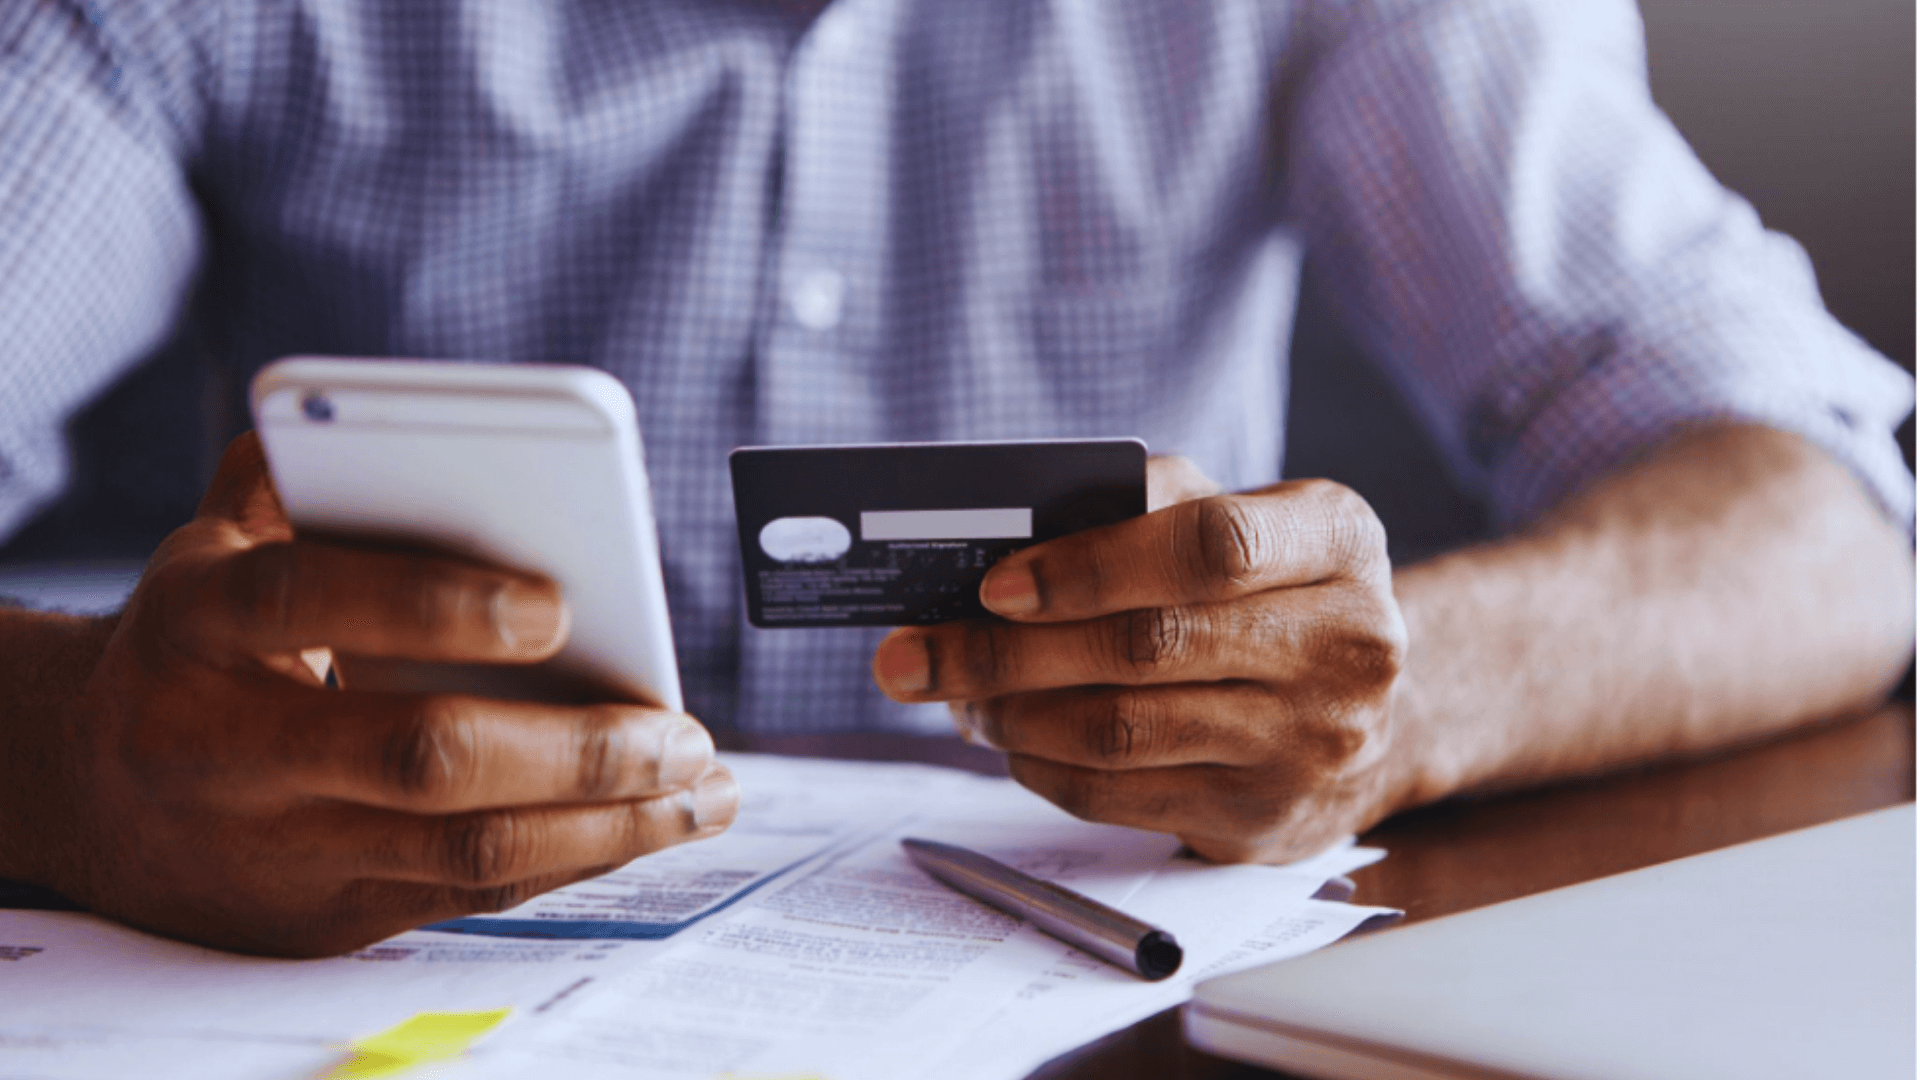 How to choose an online payment system